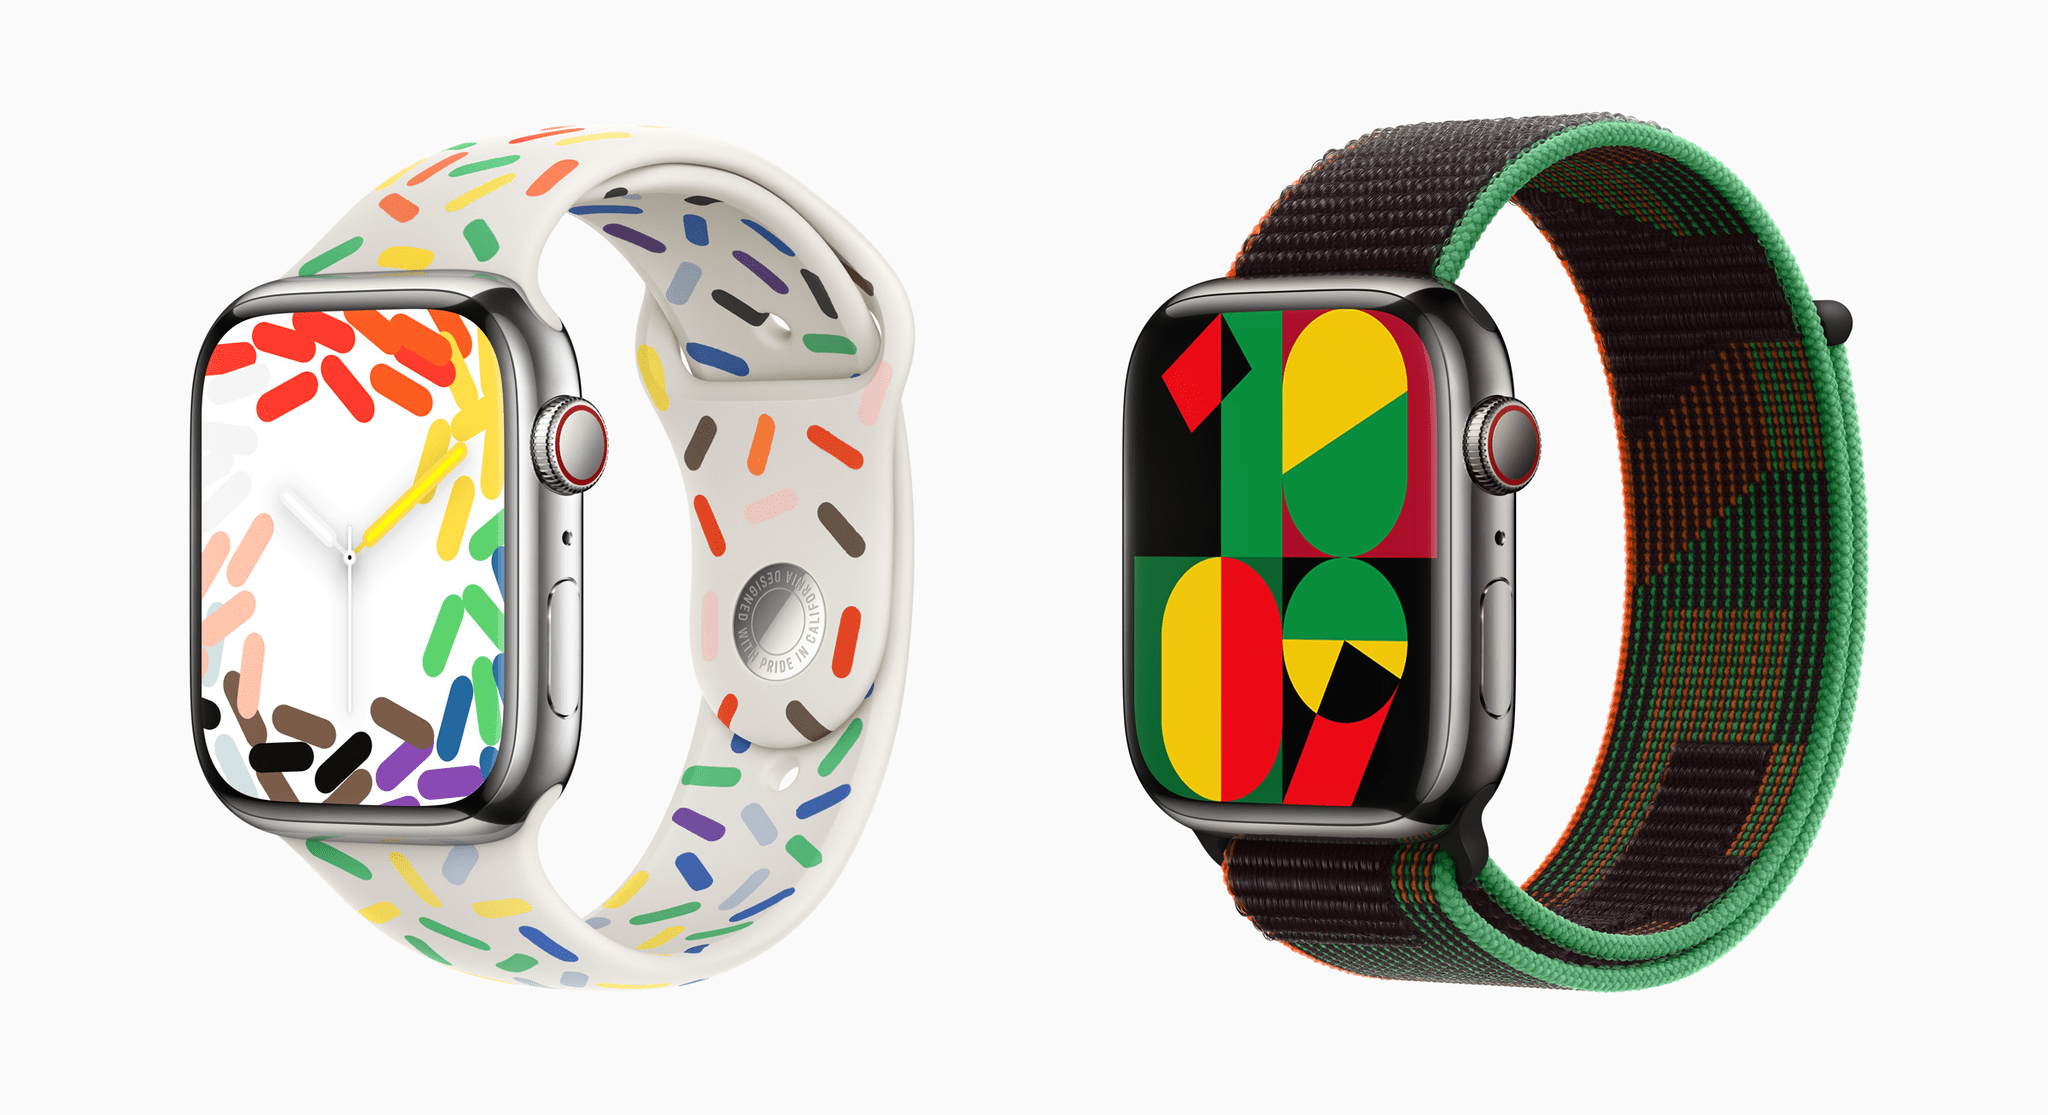 Why aren't there special edition bands for the Ultra too? Source: Apple.